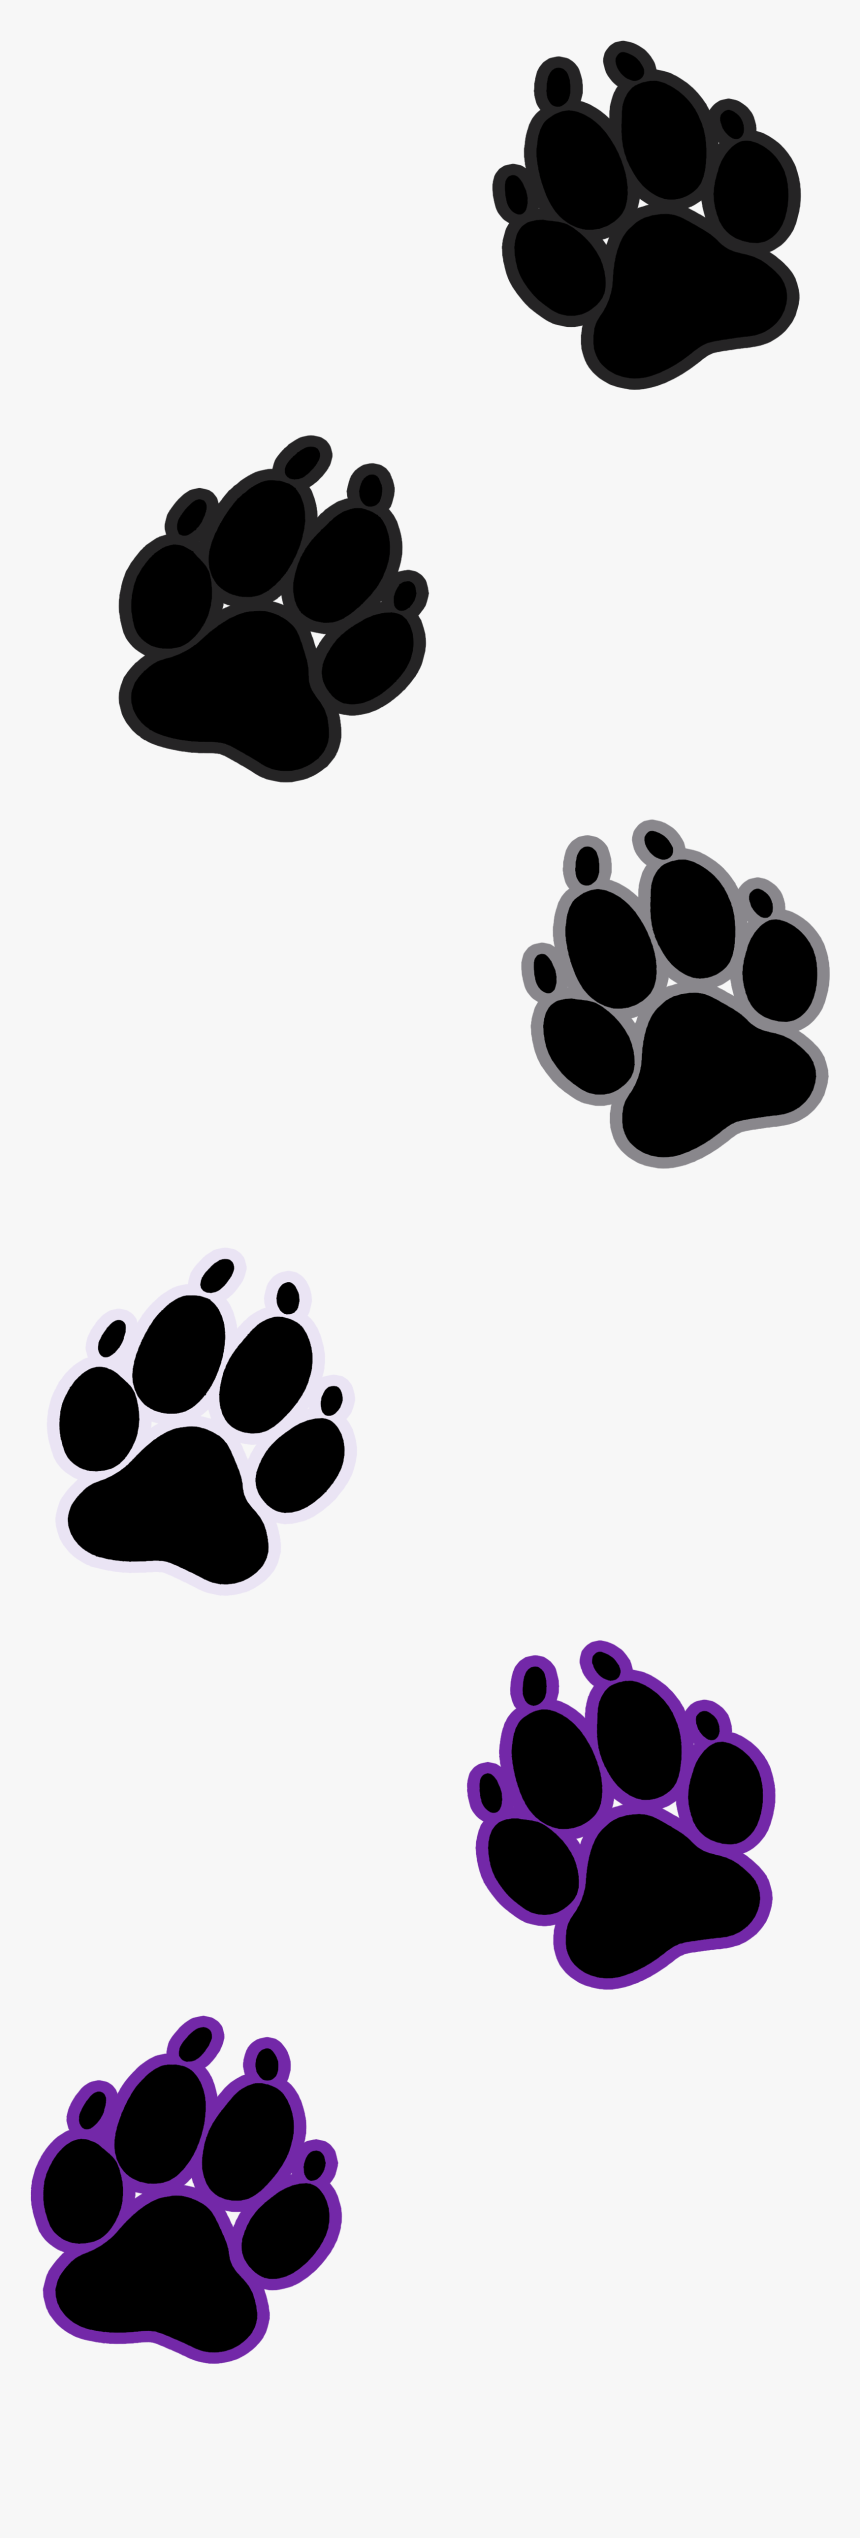 Transparent Dog Paw Outline Clipart - Dog Paw Paws Transparent Background, HD Png Download, Free Download